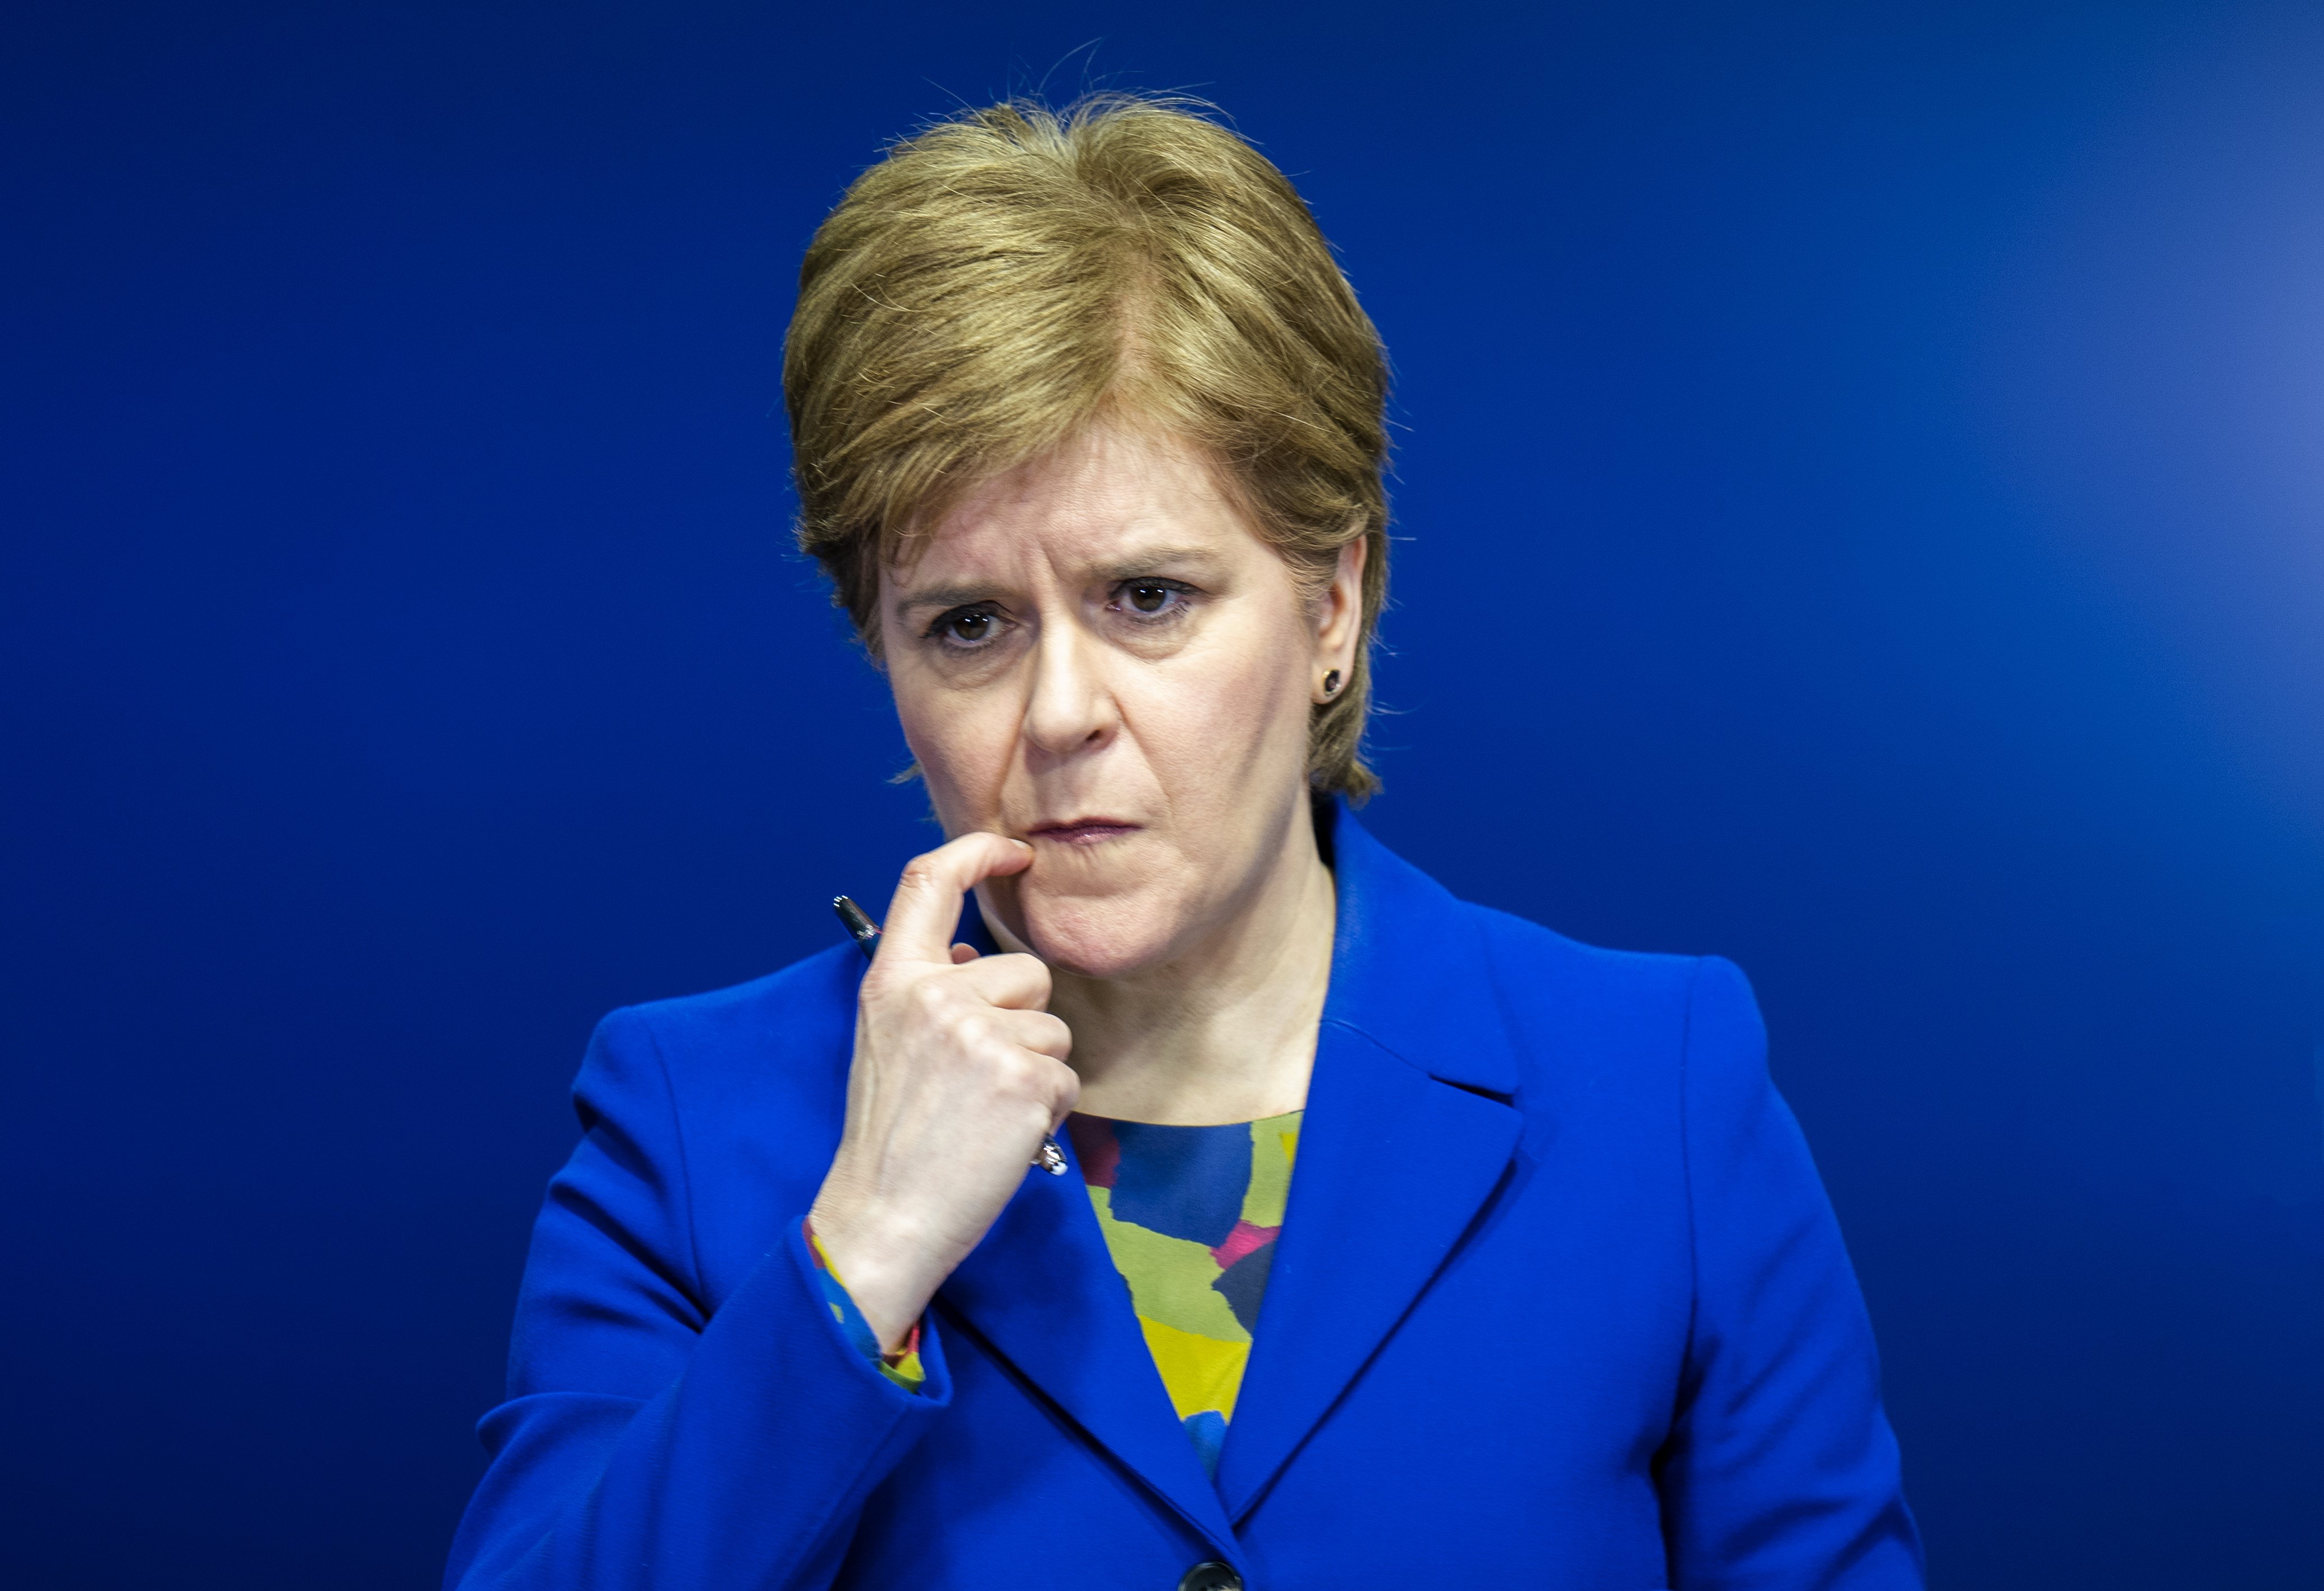 Why is Nicola Sturgeon resigning as Scotland's first minister?